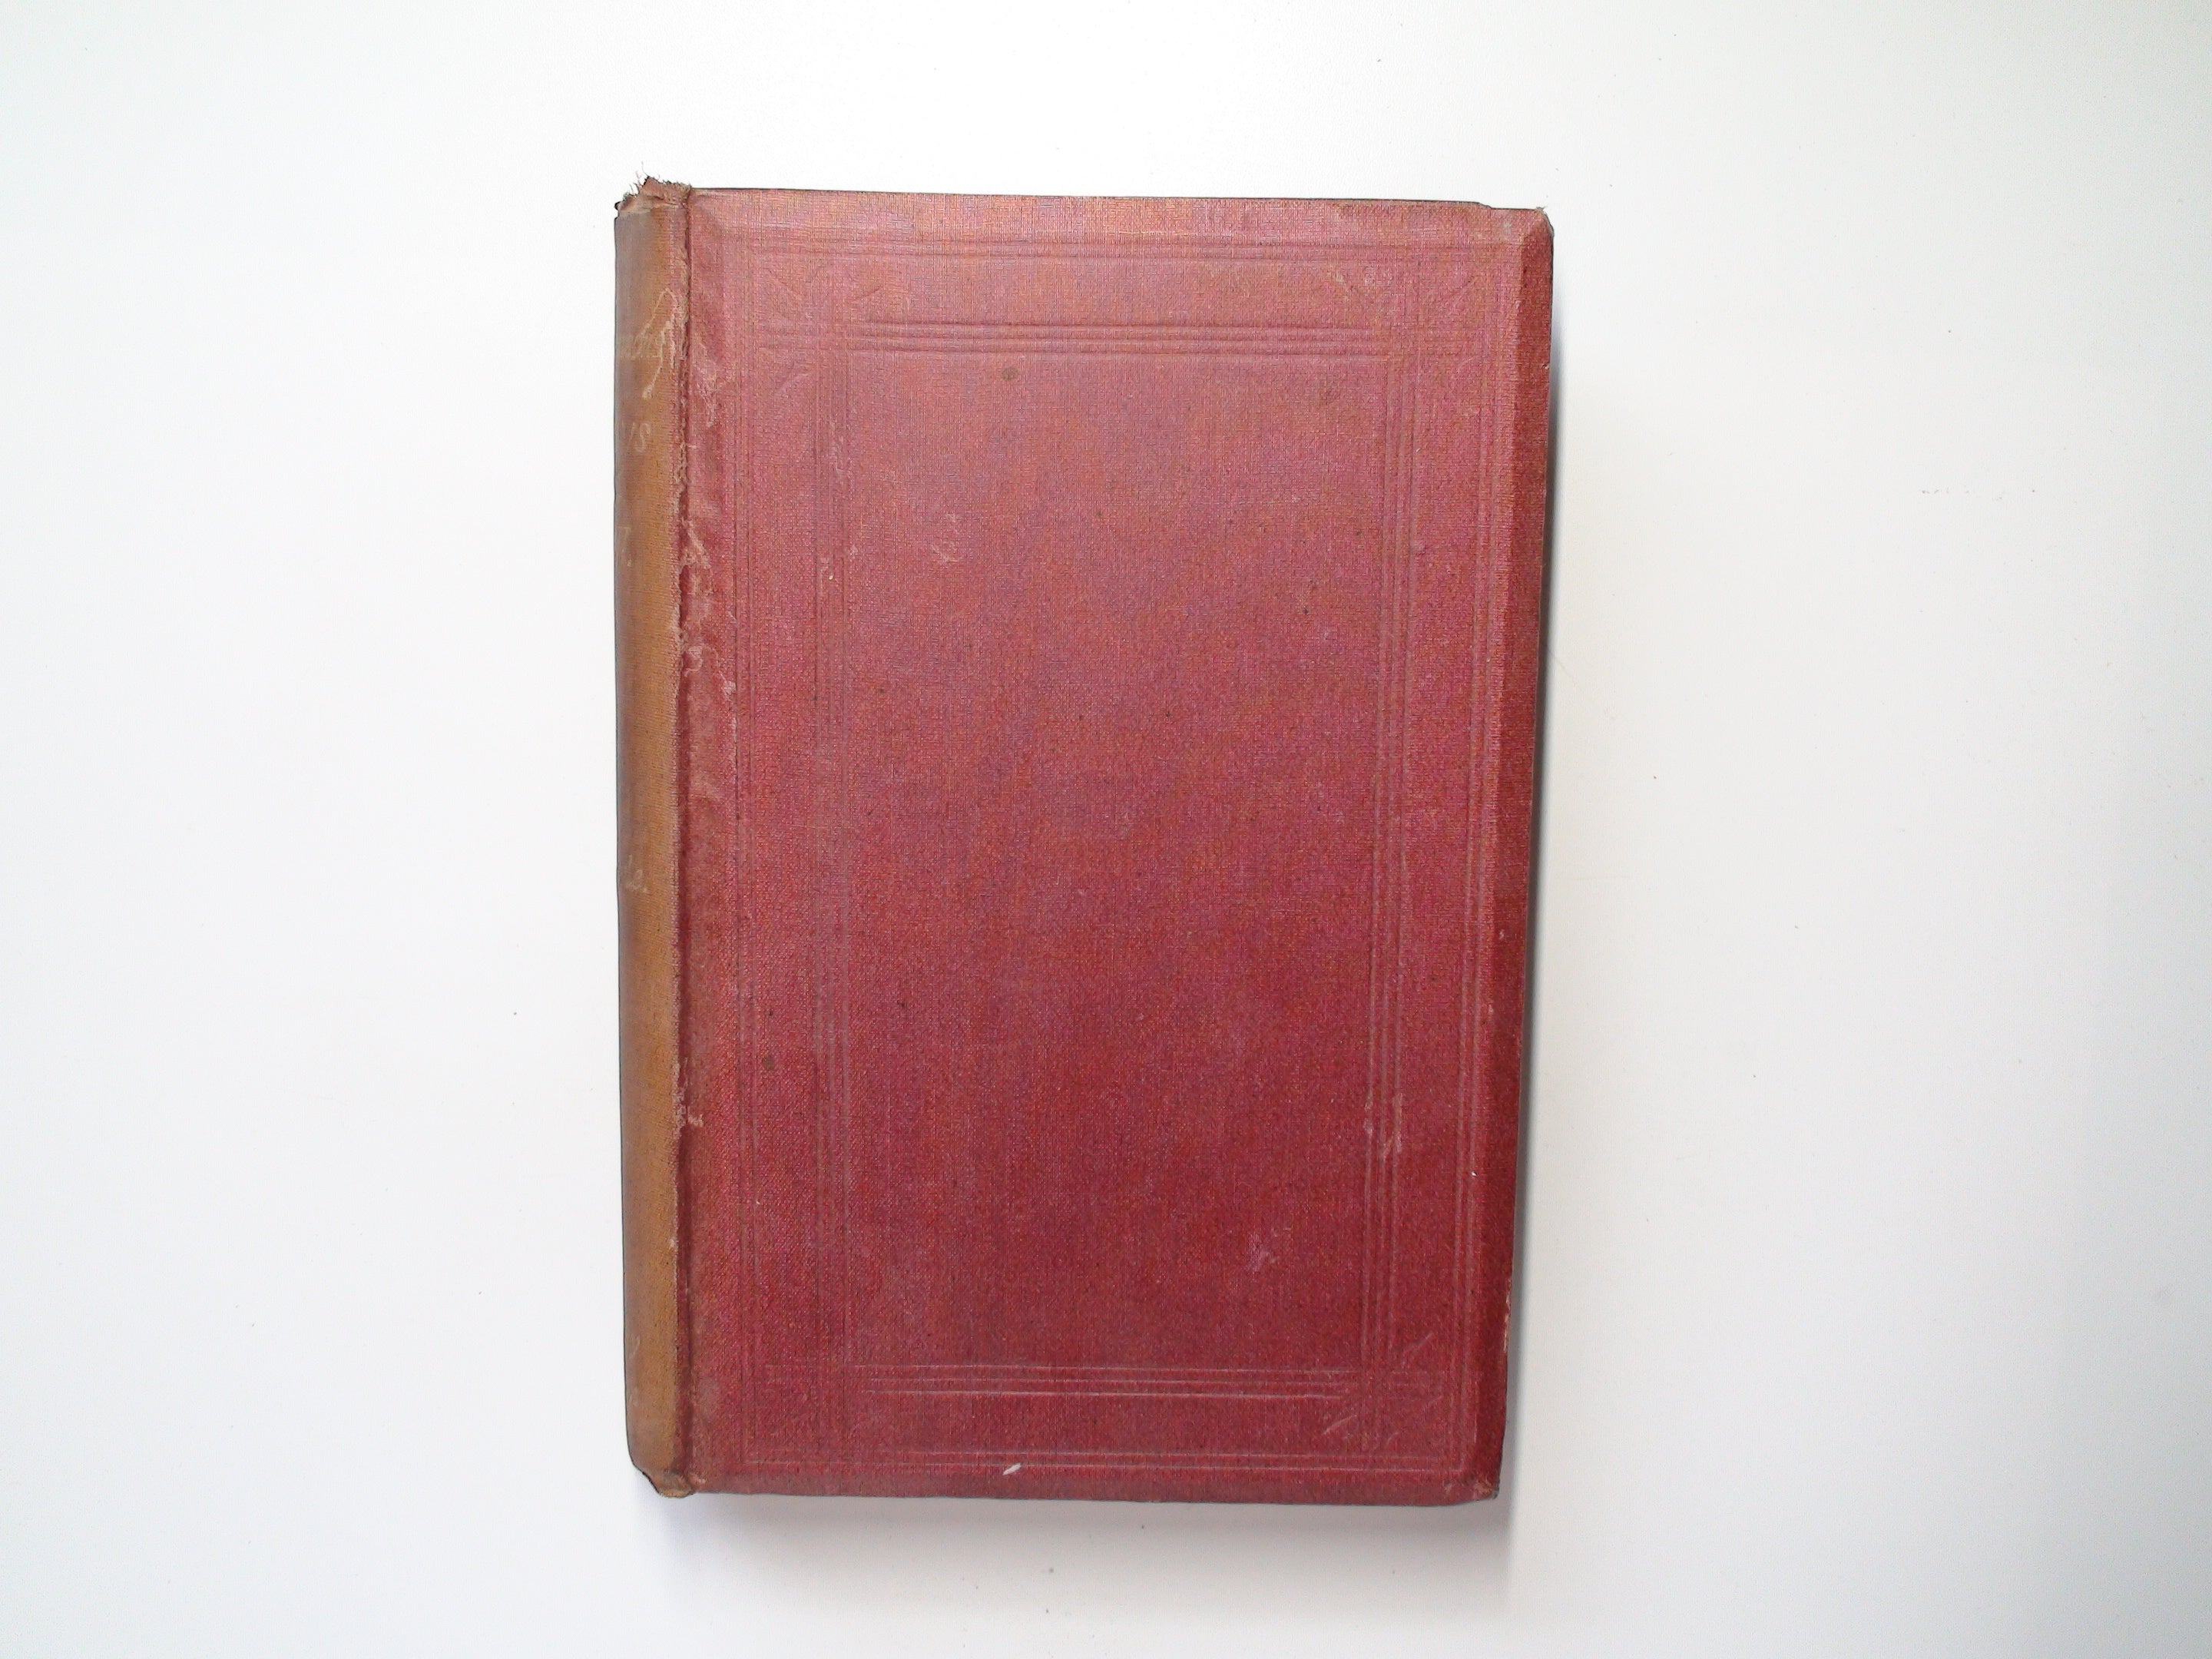 Critical and Miscellaneous Essays, by Thomas Carlyle, Vol II ONLY, 1869